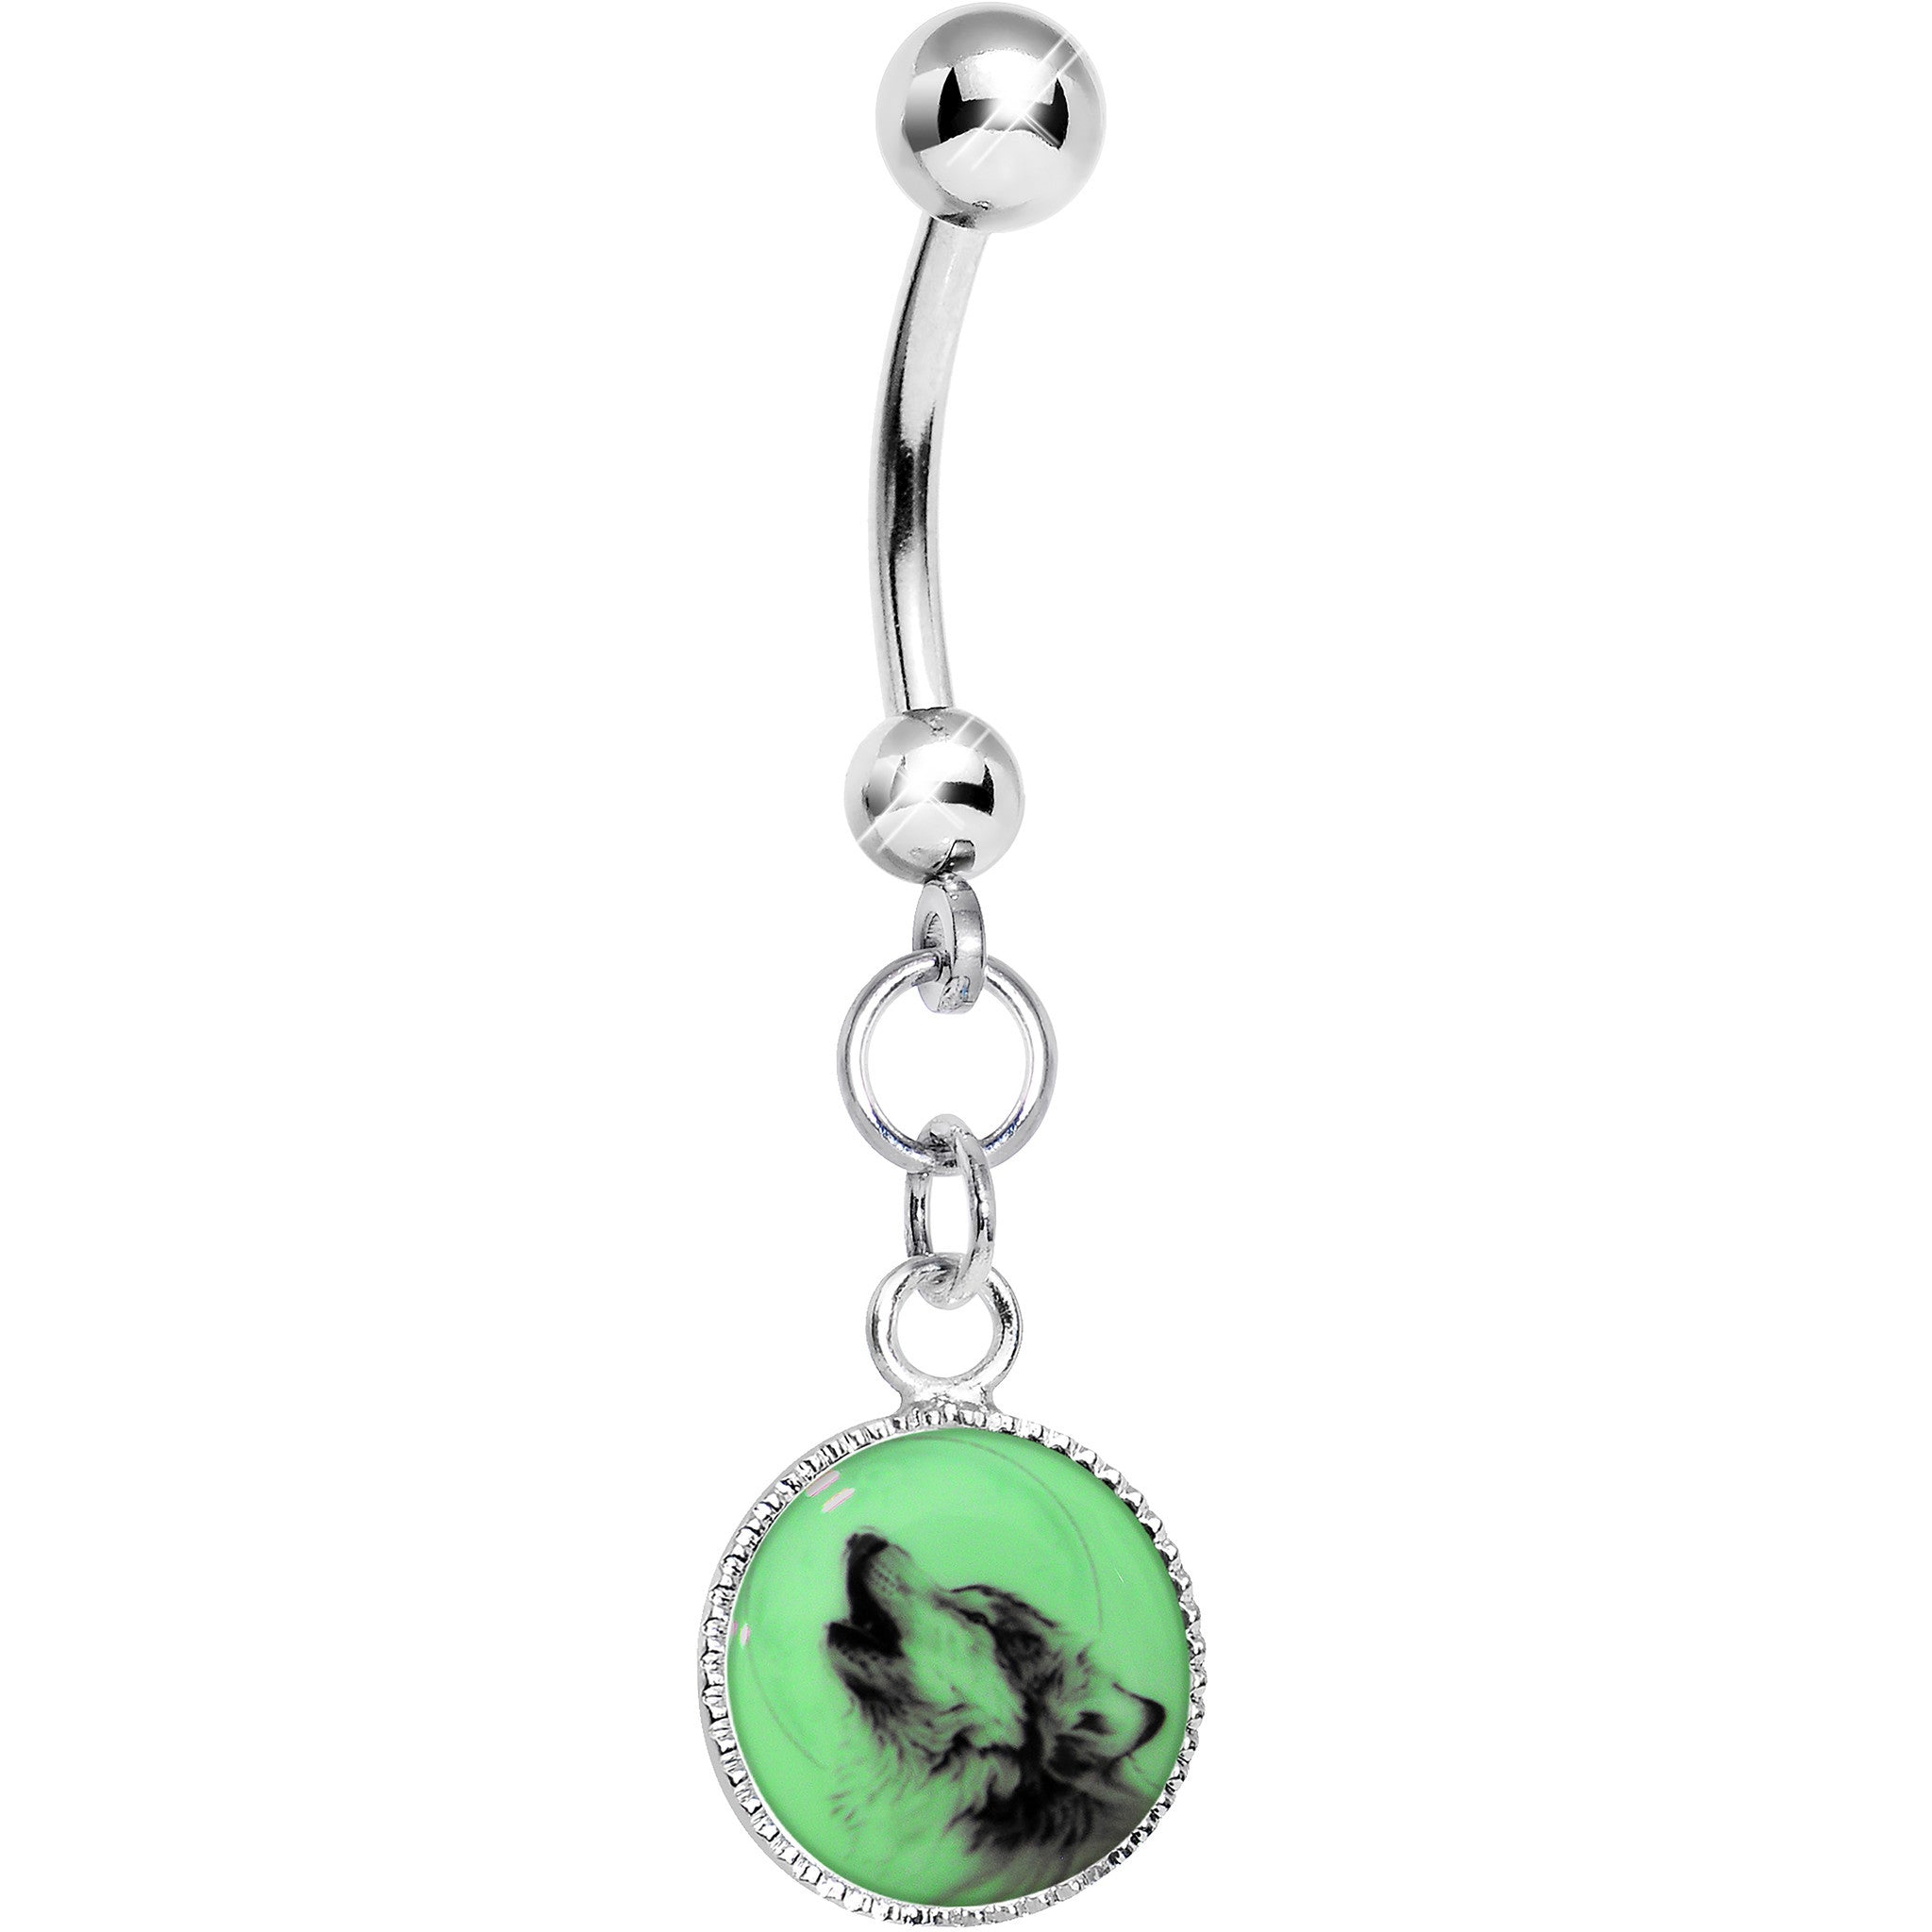 Glow in the Dark Howling Wolf Dangle Belly Ring